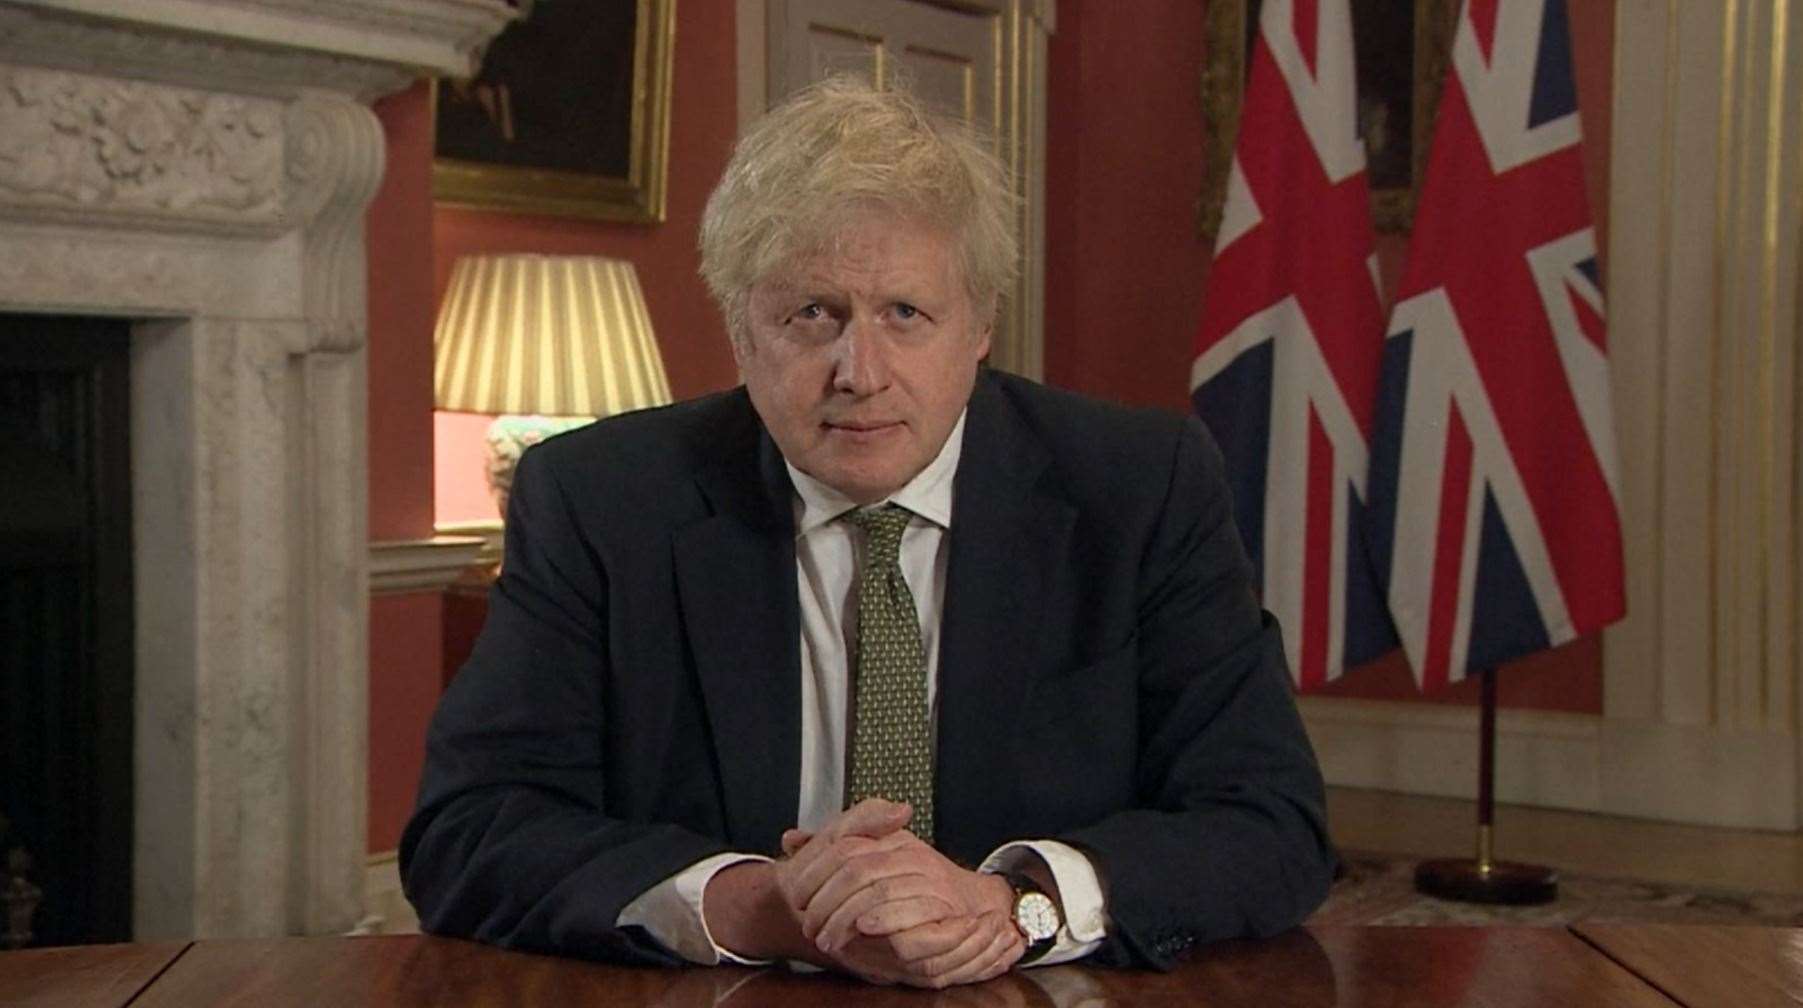 Prime Minister Boris Johnson, pictured during a televised address to the nation